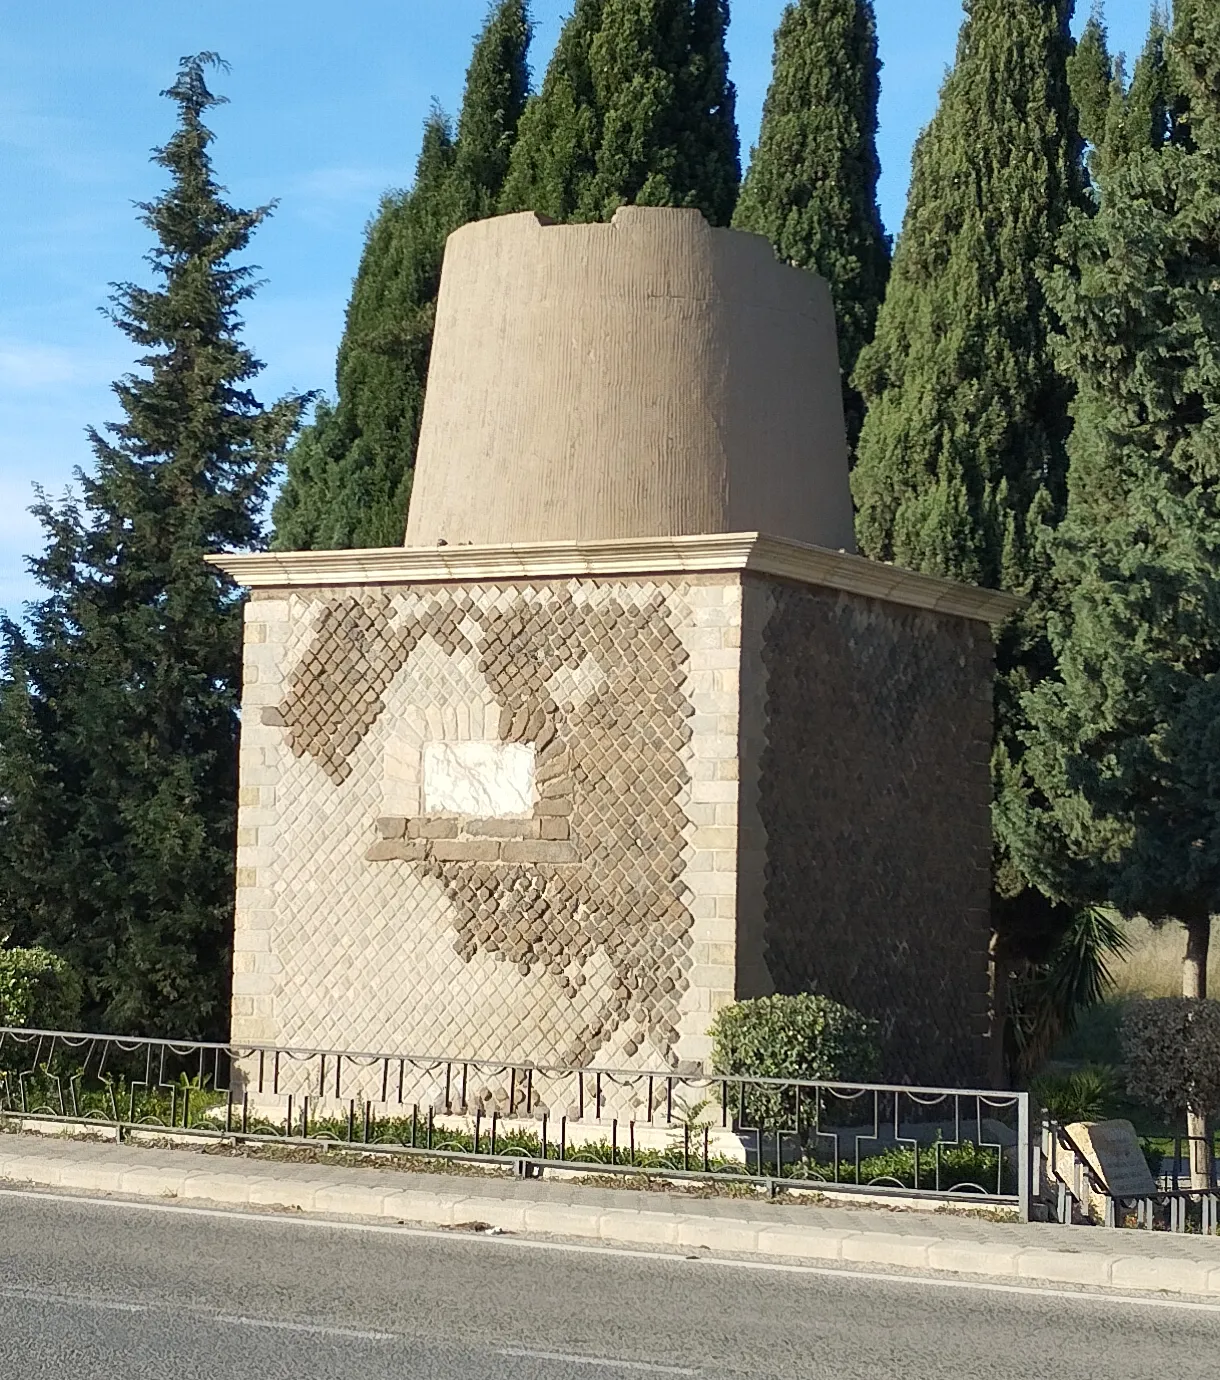 Photo showing: The Torre Ciega, a sepulchral monument from the 1st century BC located on the outskirts of the ancient Roman city of Carthago Nova (Cartagena, Spain).